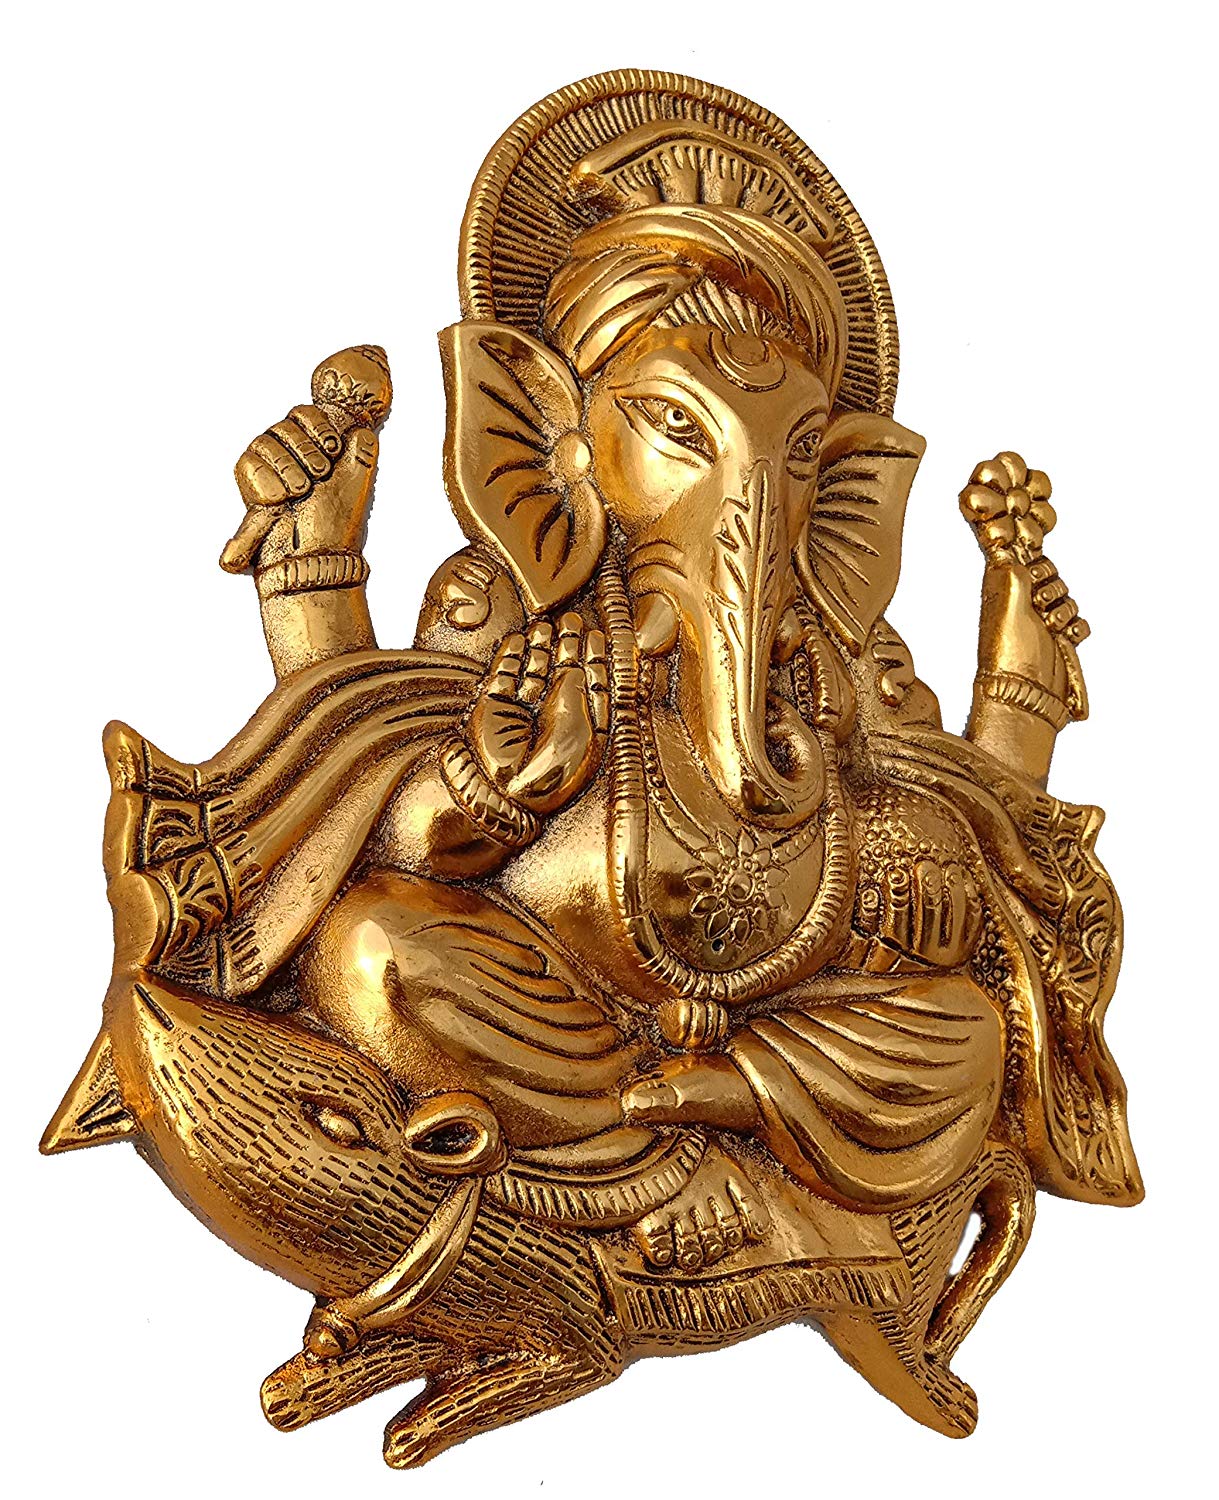 Metal Ganesh Idol Statue Wall Hanging for Home Decor Wall Decor (Golden, 11 Inches Height) - GreentouchCrafts